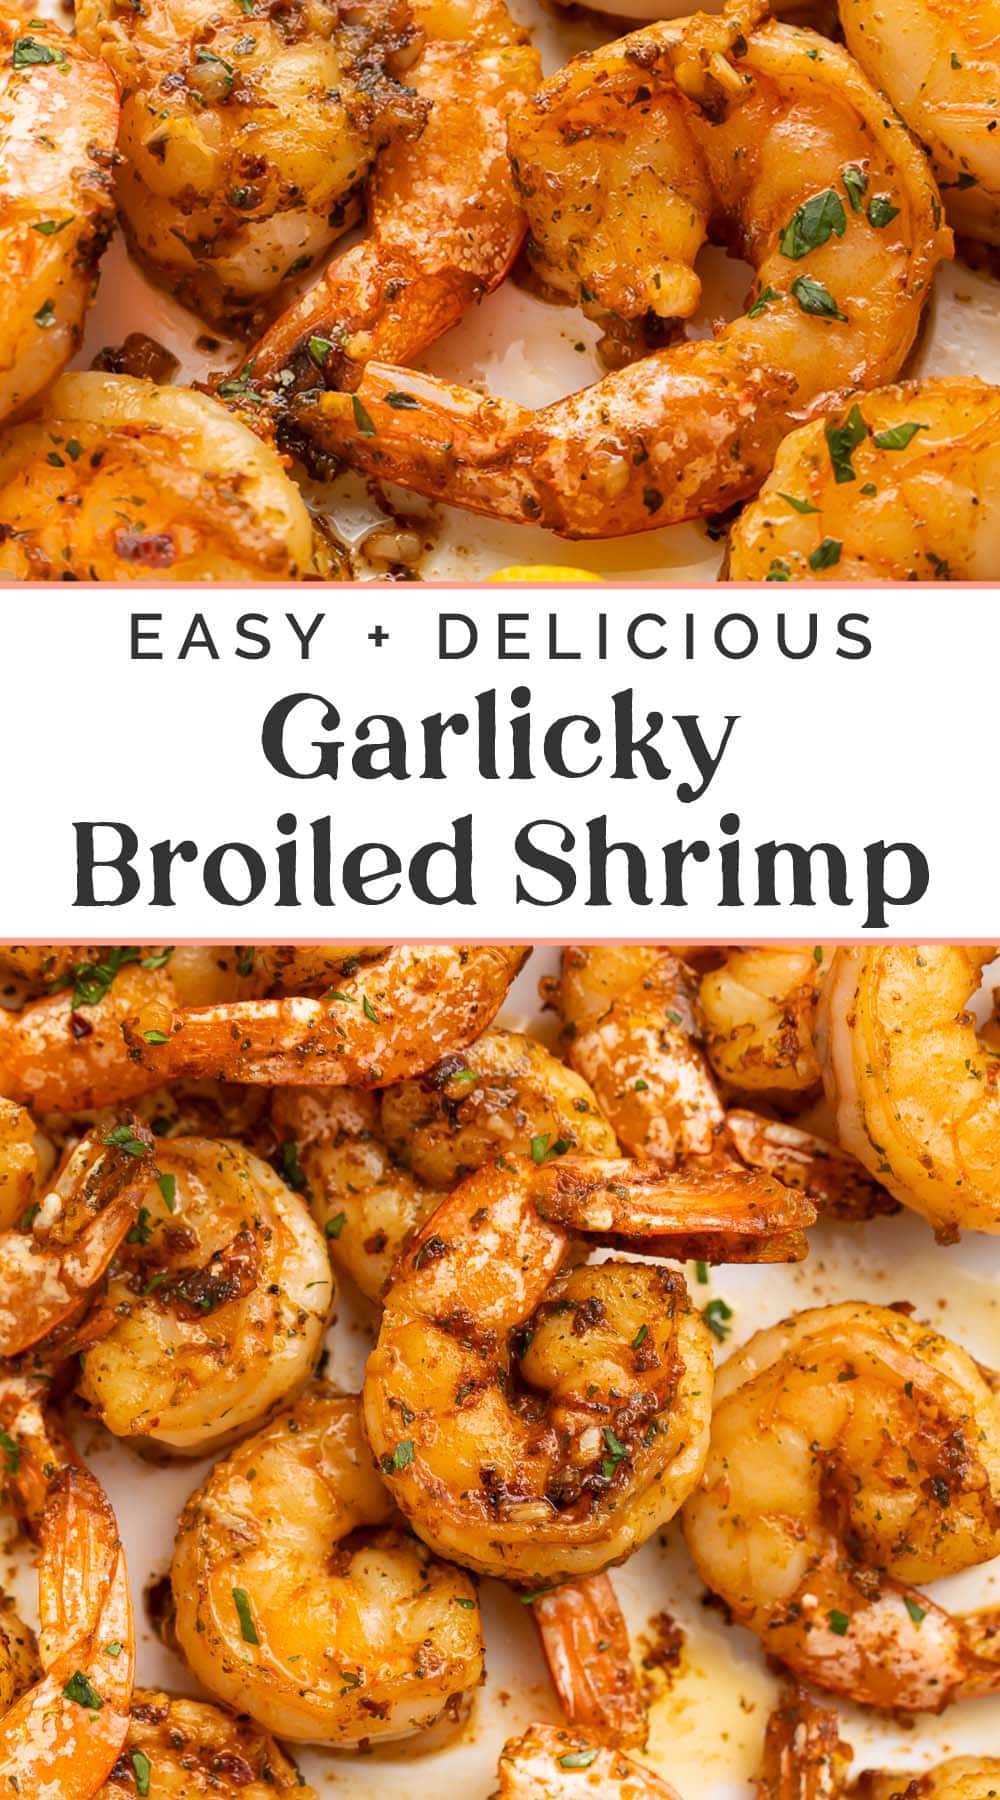 Pin graphic for broiled shrimp.